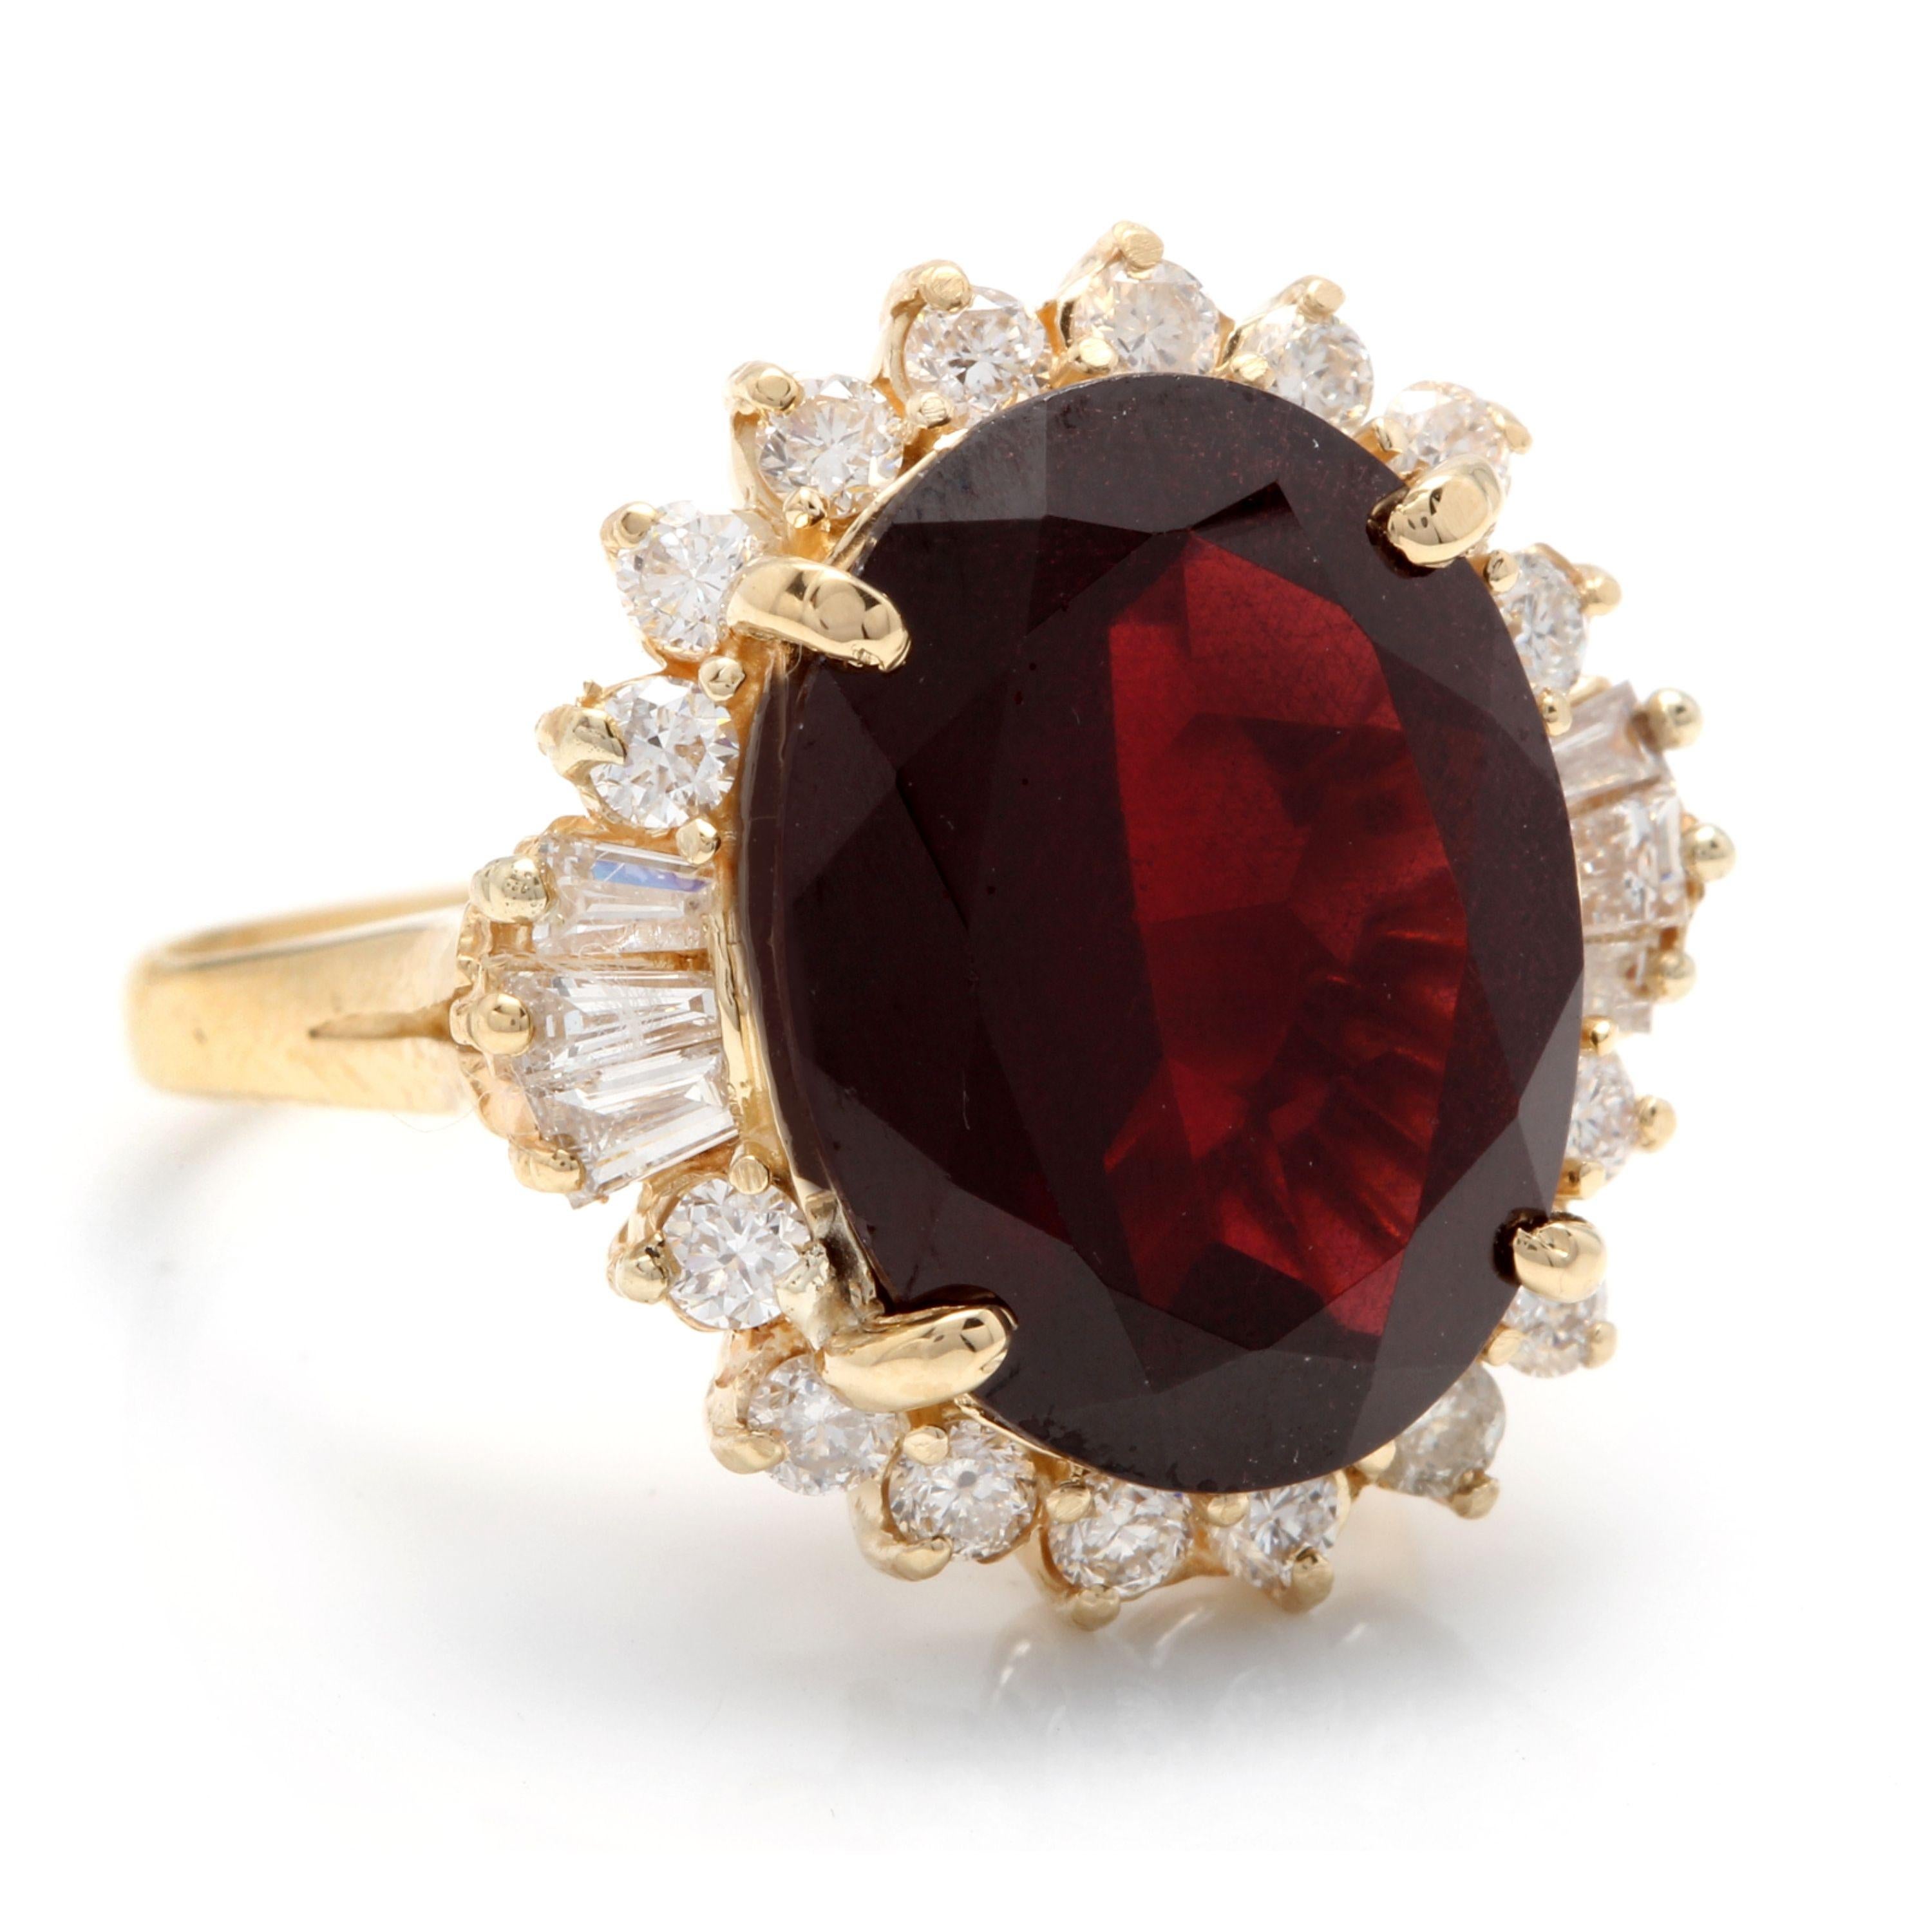 9.95 Carats Impressive Red Garnet and Natural Diamond 14K Yellow Gold Ring

Total Natural Oval Red Garnet Weight is: Approx. 9.00 Carats

Garnet Measures: Approx. 16.00 x 12.00mm

Natural Round & Baguette Diamonds Weight: Approx. 0.95d Carats (color